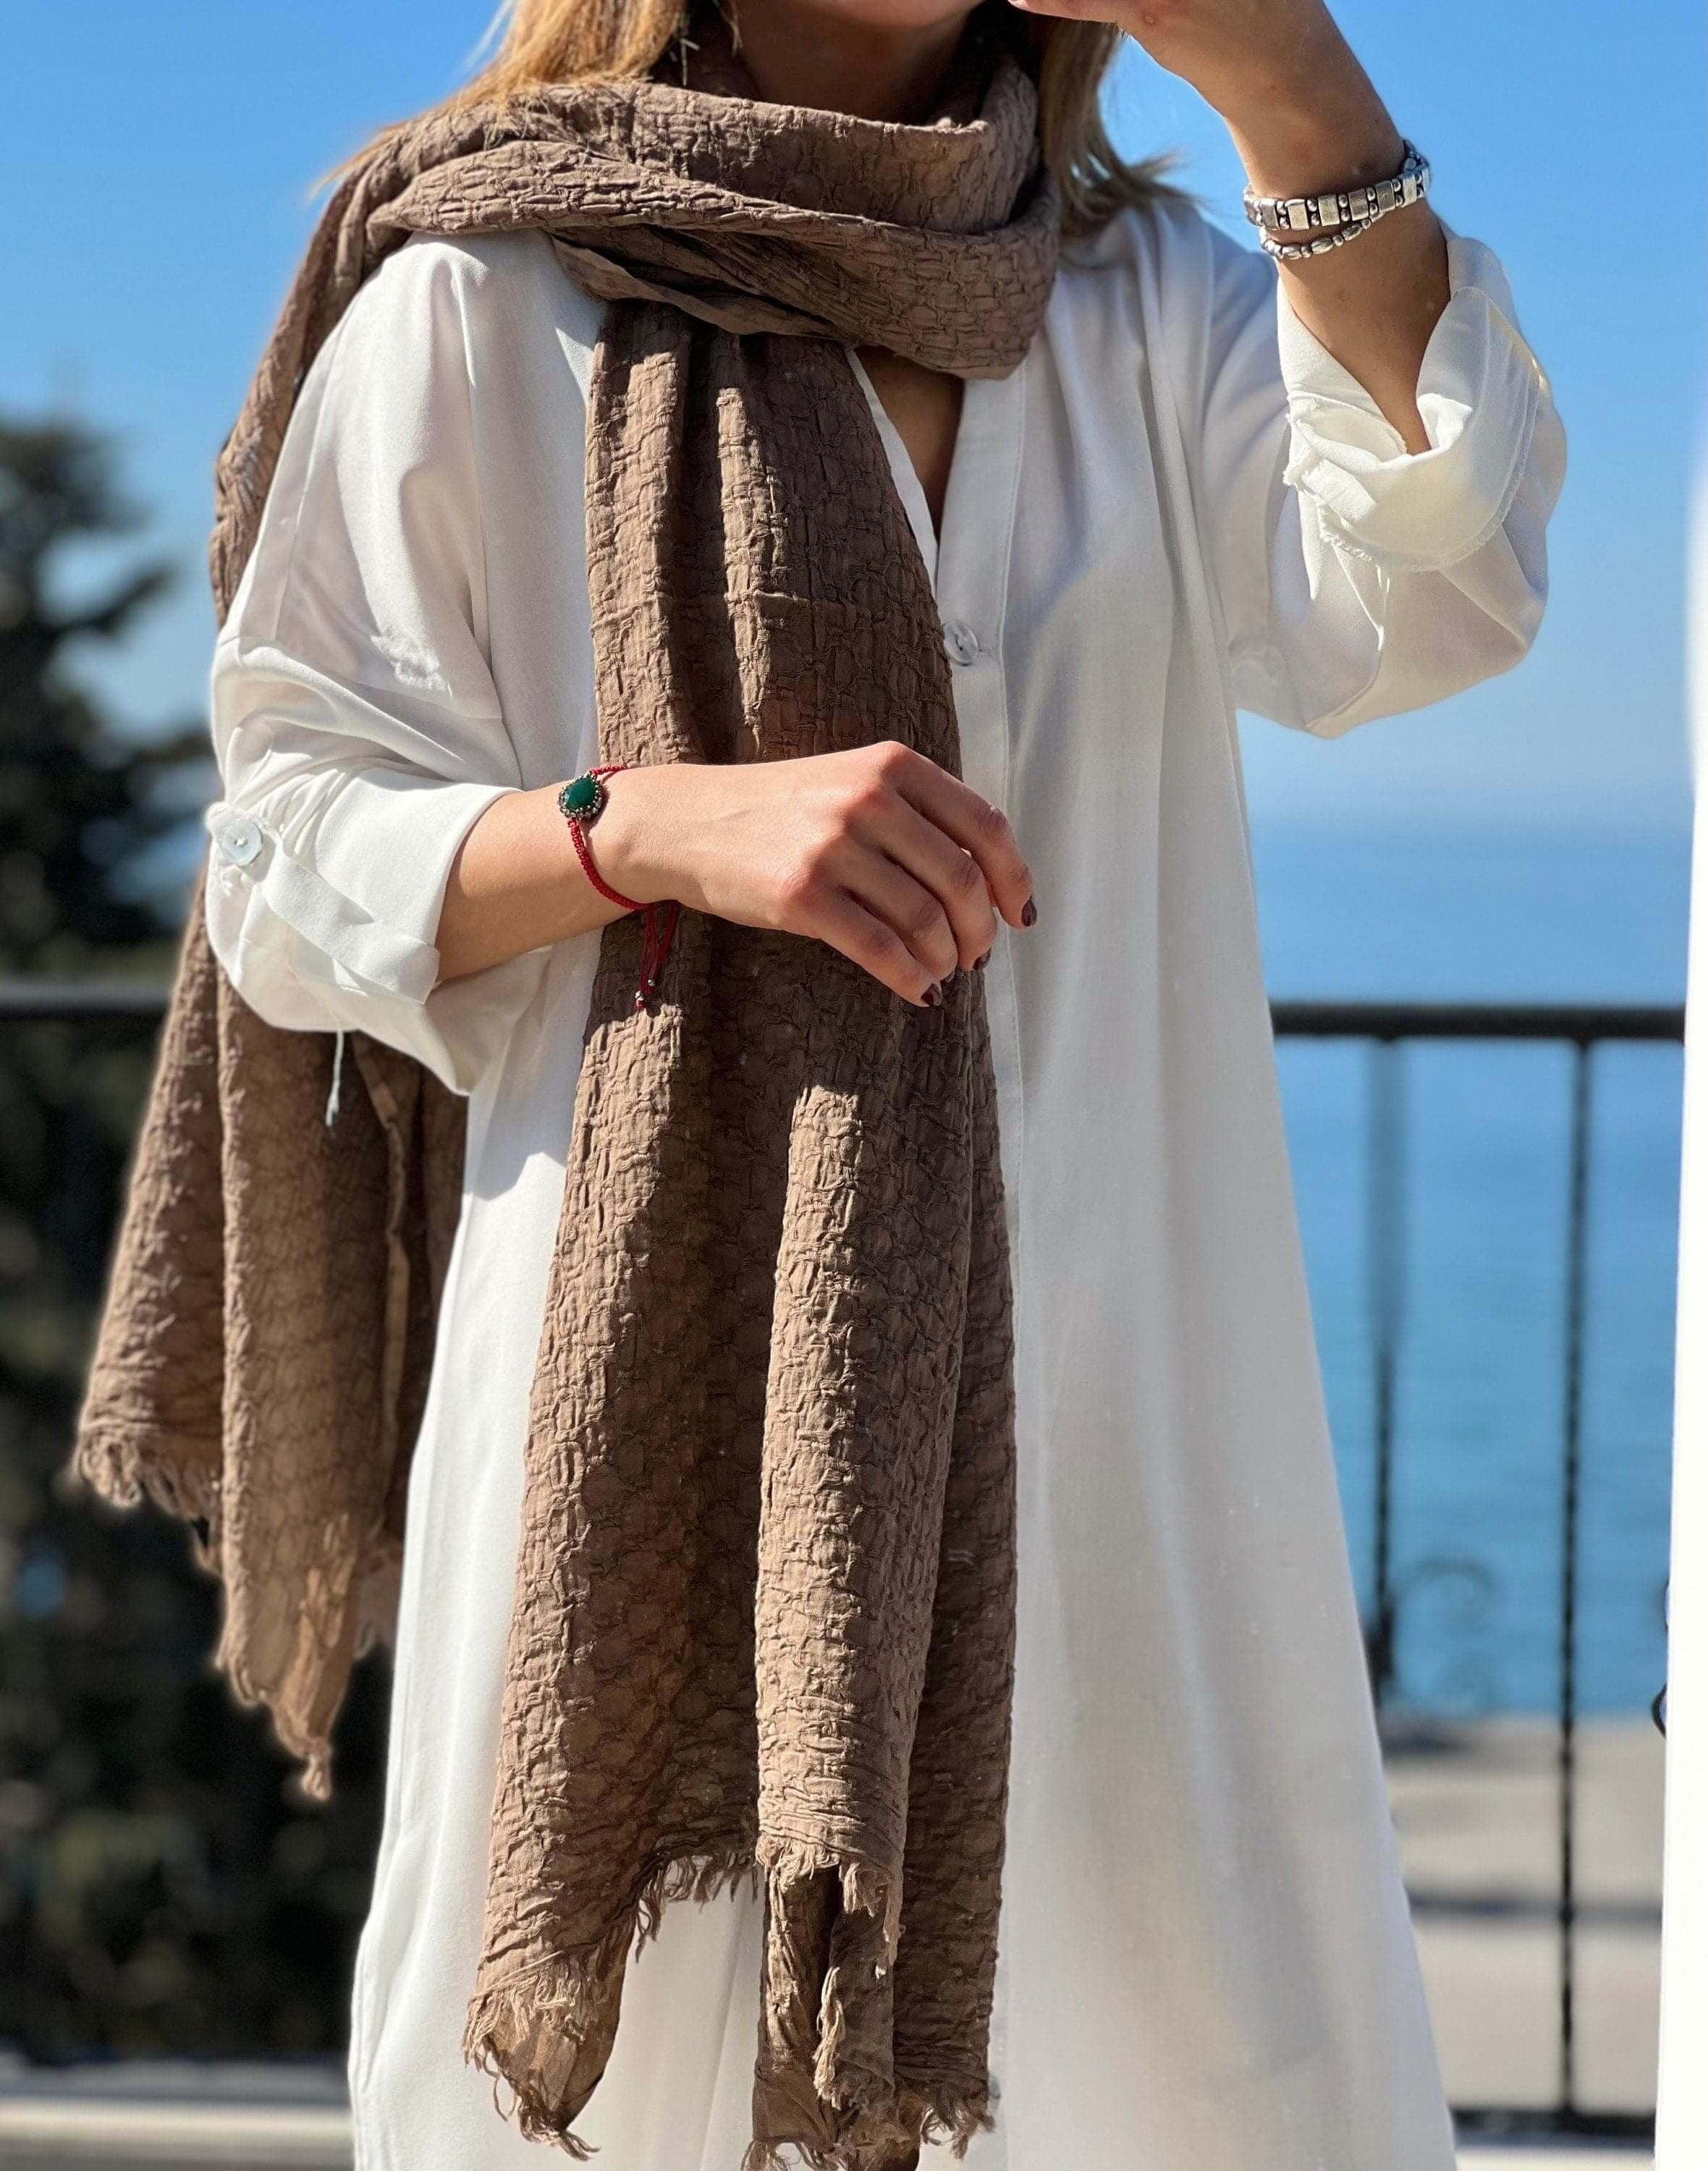 Elegant Organic Cotton Mink Scarf - Ideal Gift for Women - Large Rectangle Design for Year-Round Comfort available at Moyoni Design